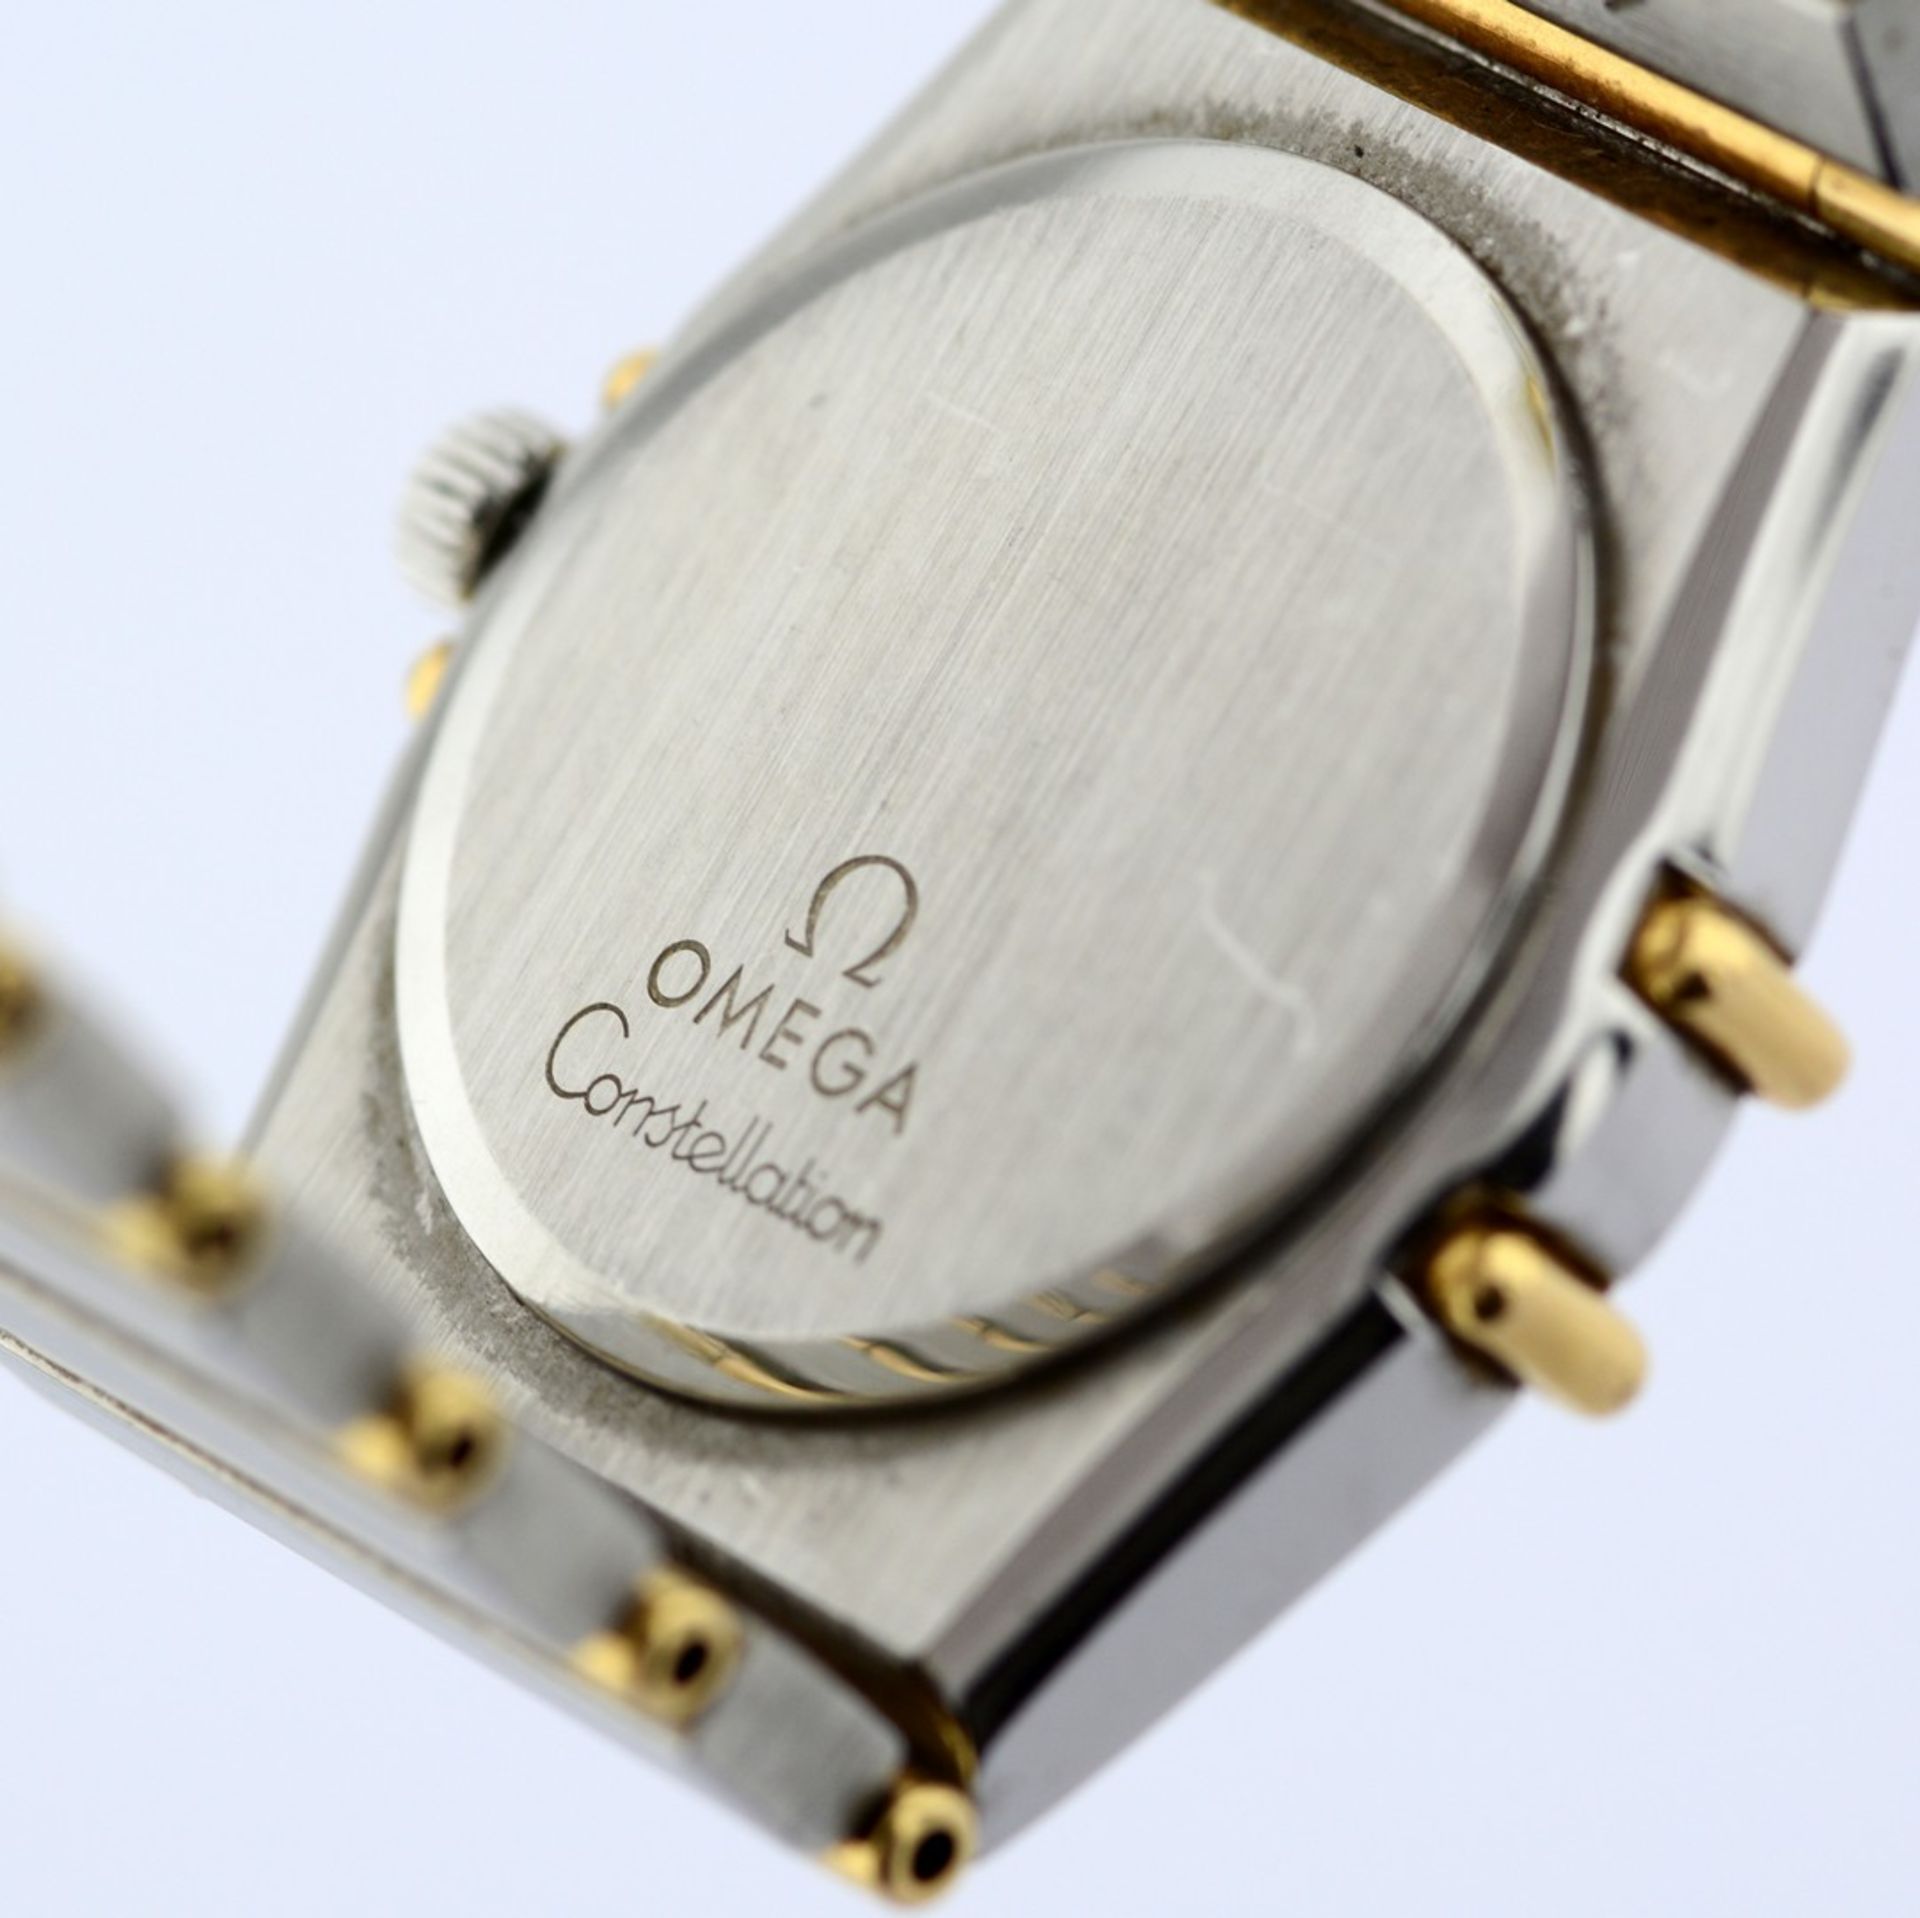 Omega / Constellation - Lady's Steel Wrist Watch - Image 7 of 7